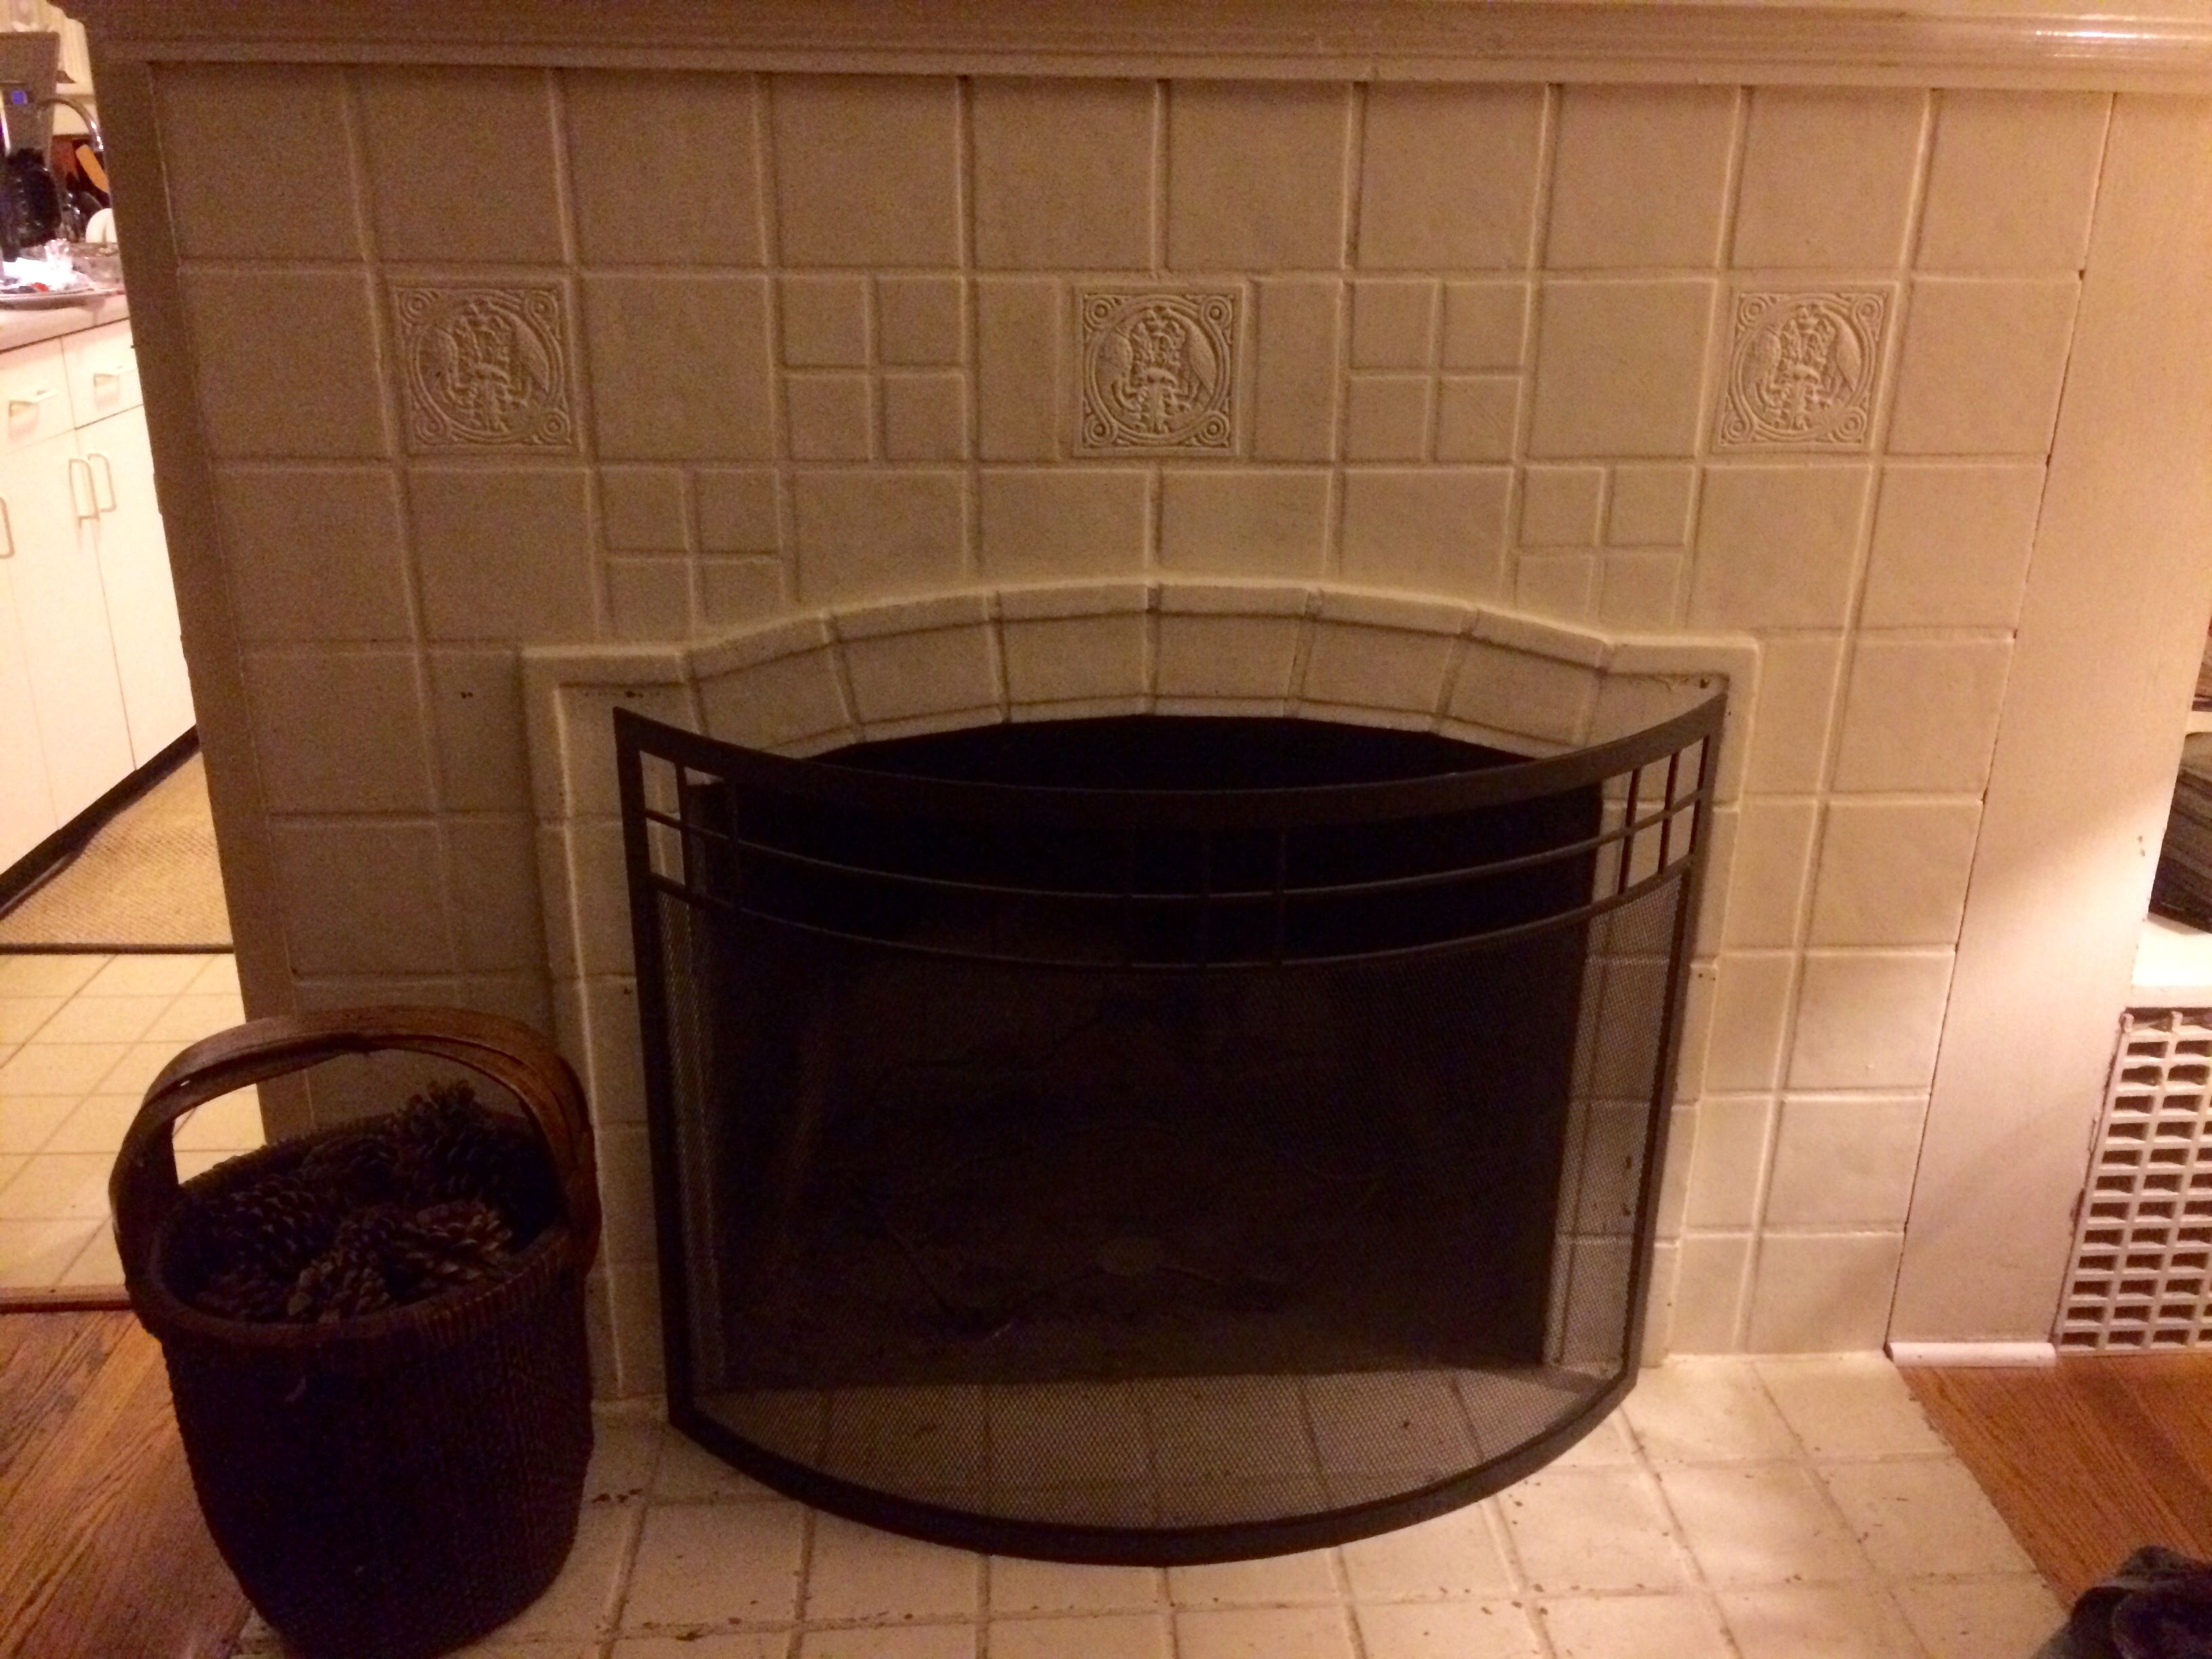 Concrete Fireplace Hearth Lovely Hamilton Tile Fireplace Surround C 1928 In the Seattle Wa